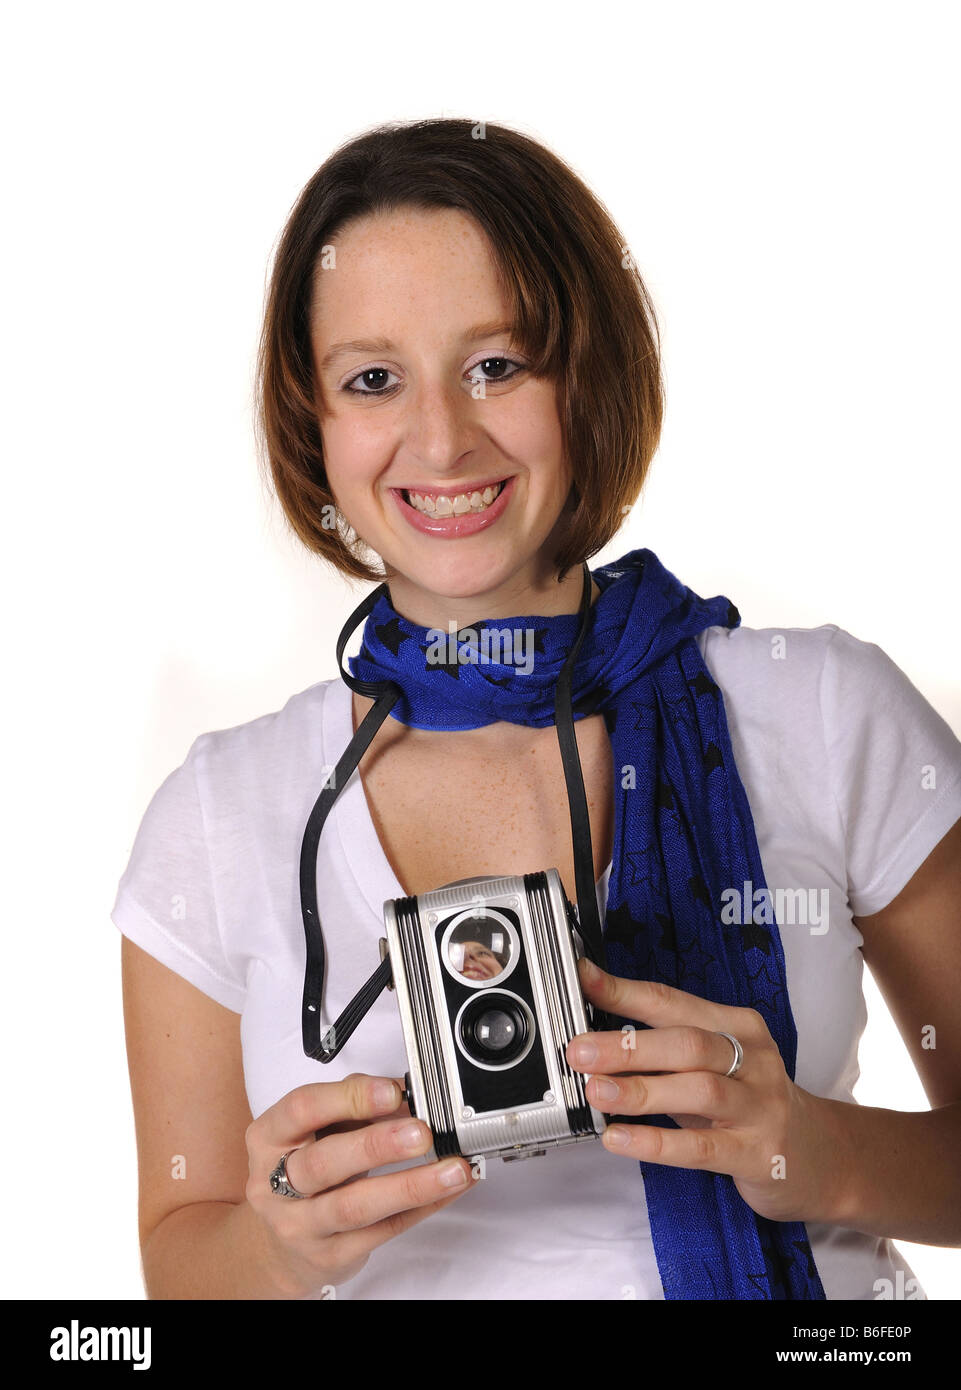 Teen girl with vintage camera. Stock Photo